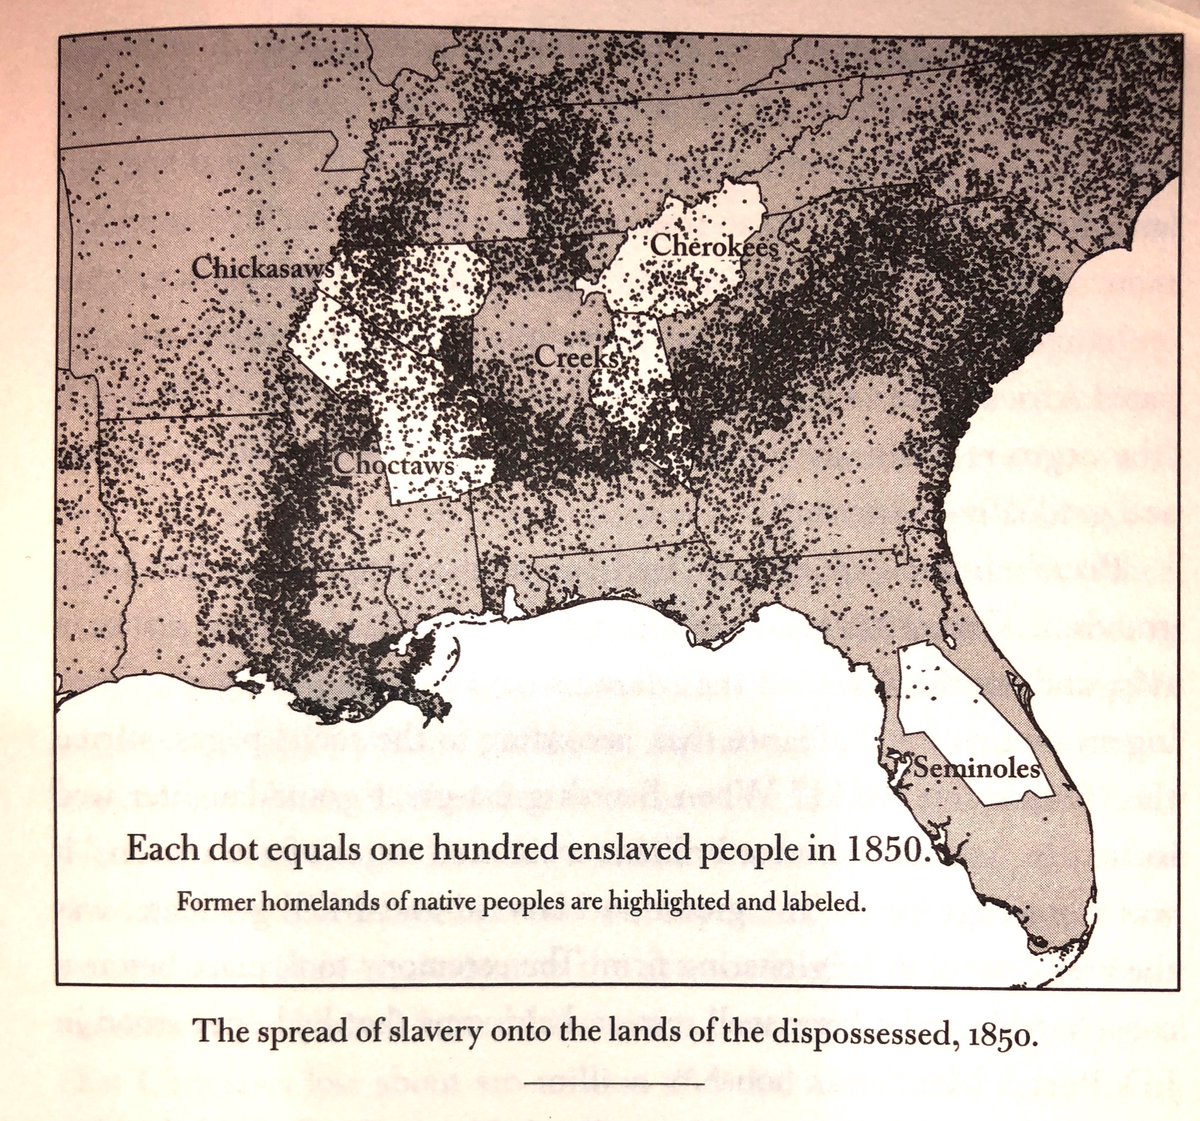 Mapping the spread of enslavement onto former Cherokee, Creek, Choctaw, Chickasaw, and Seminole lands following American seizure/ethnic cleansing: